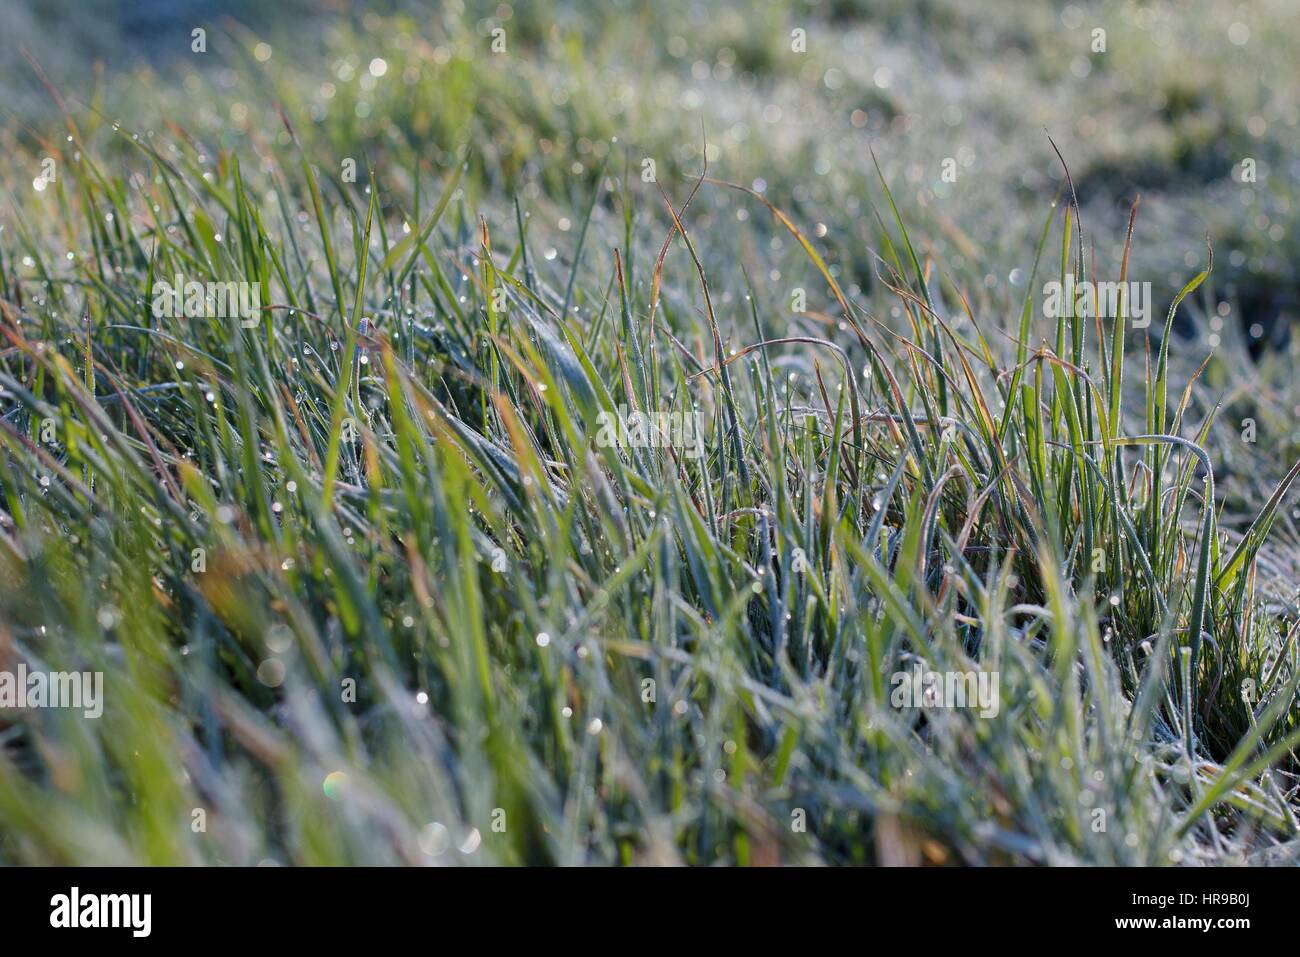 Frost and dew drops on long grass, close up. Stock Photo